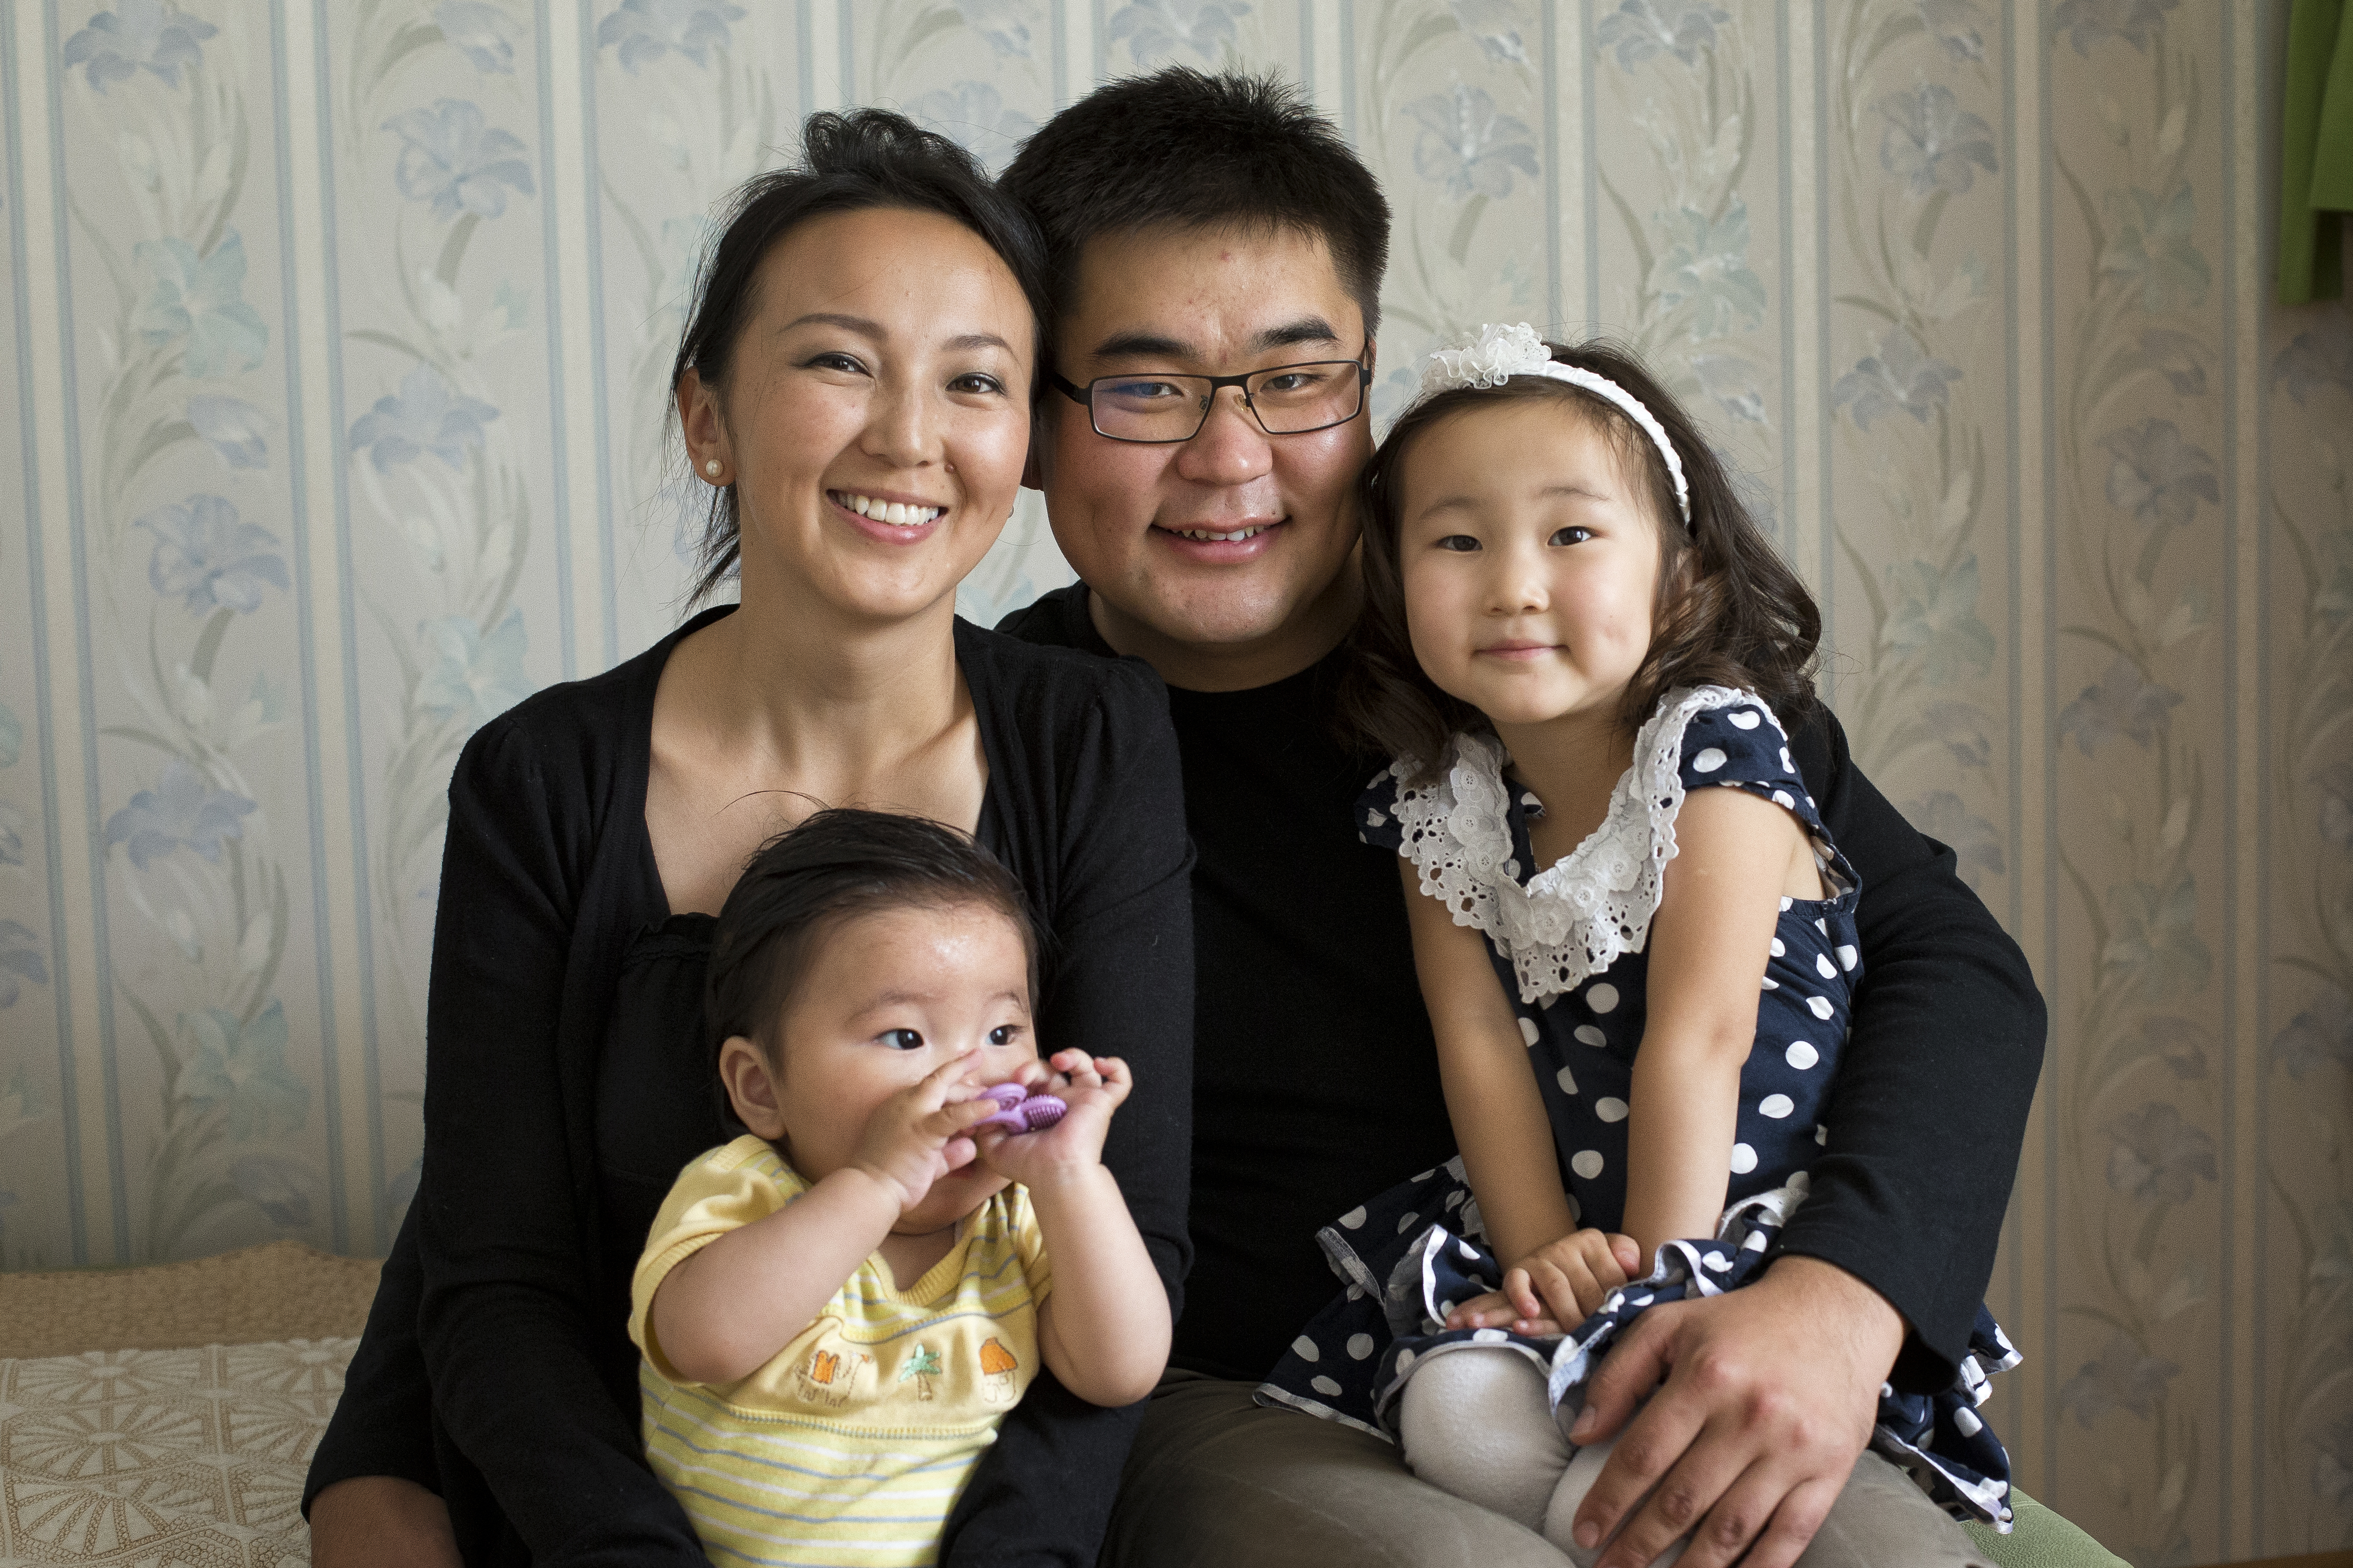 A husband and wife sit next to one another and smile with their two young children on their laps.